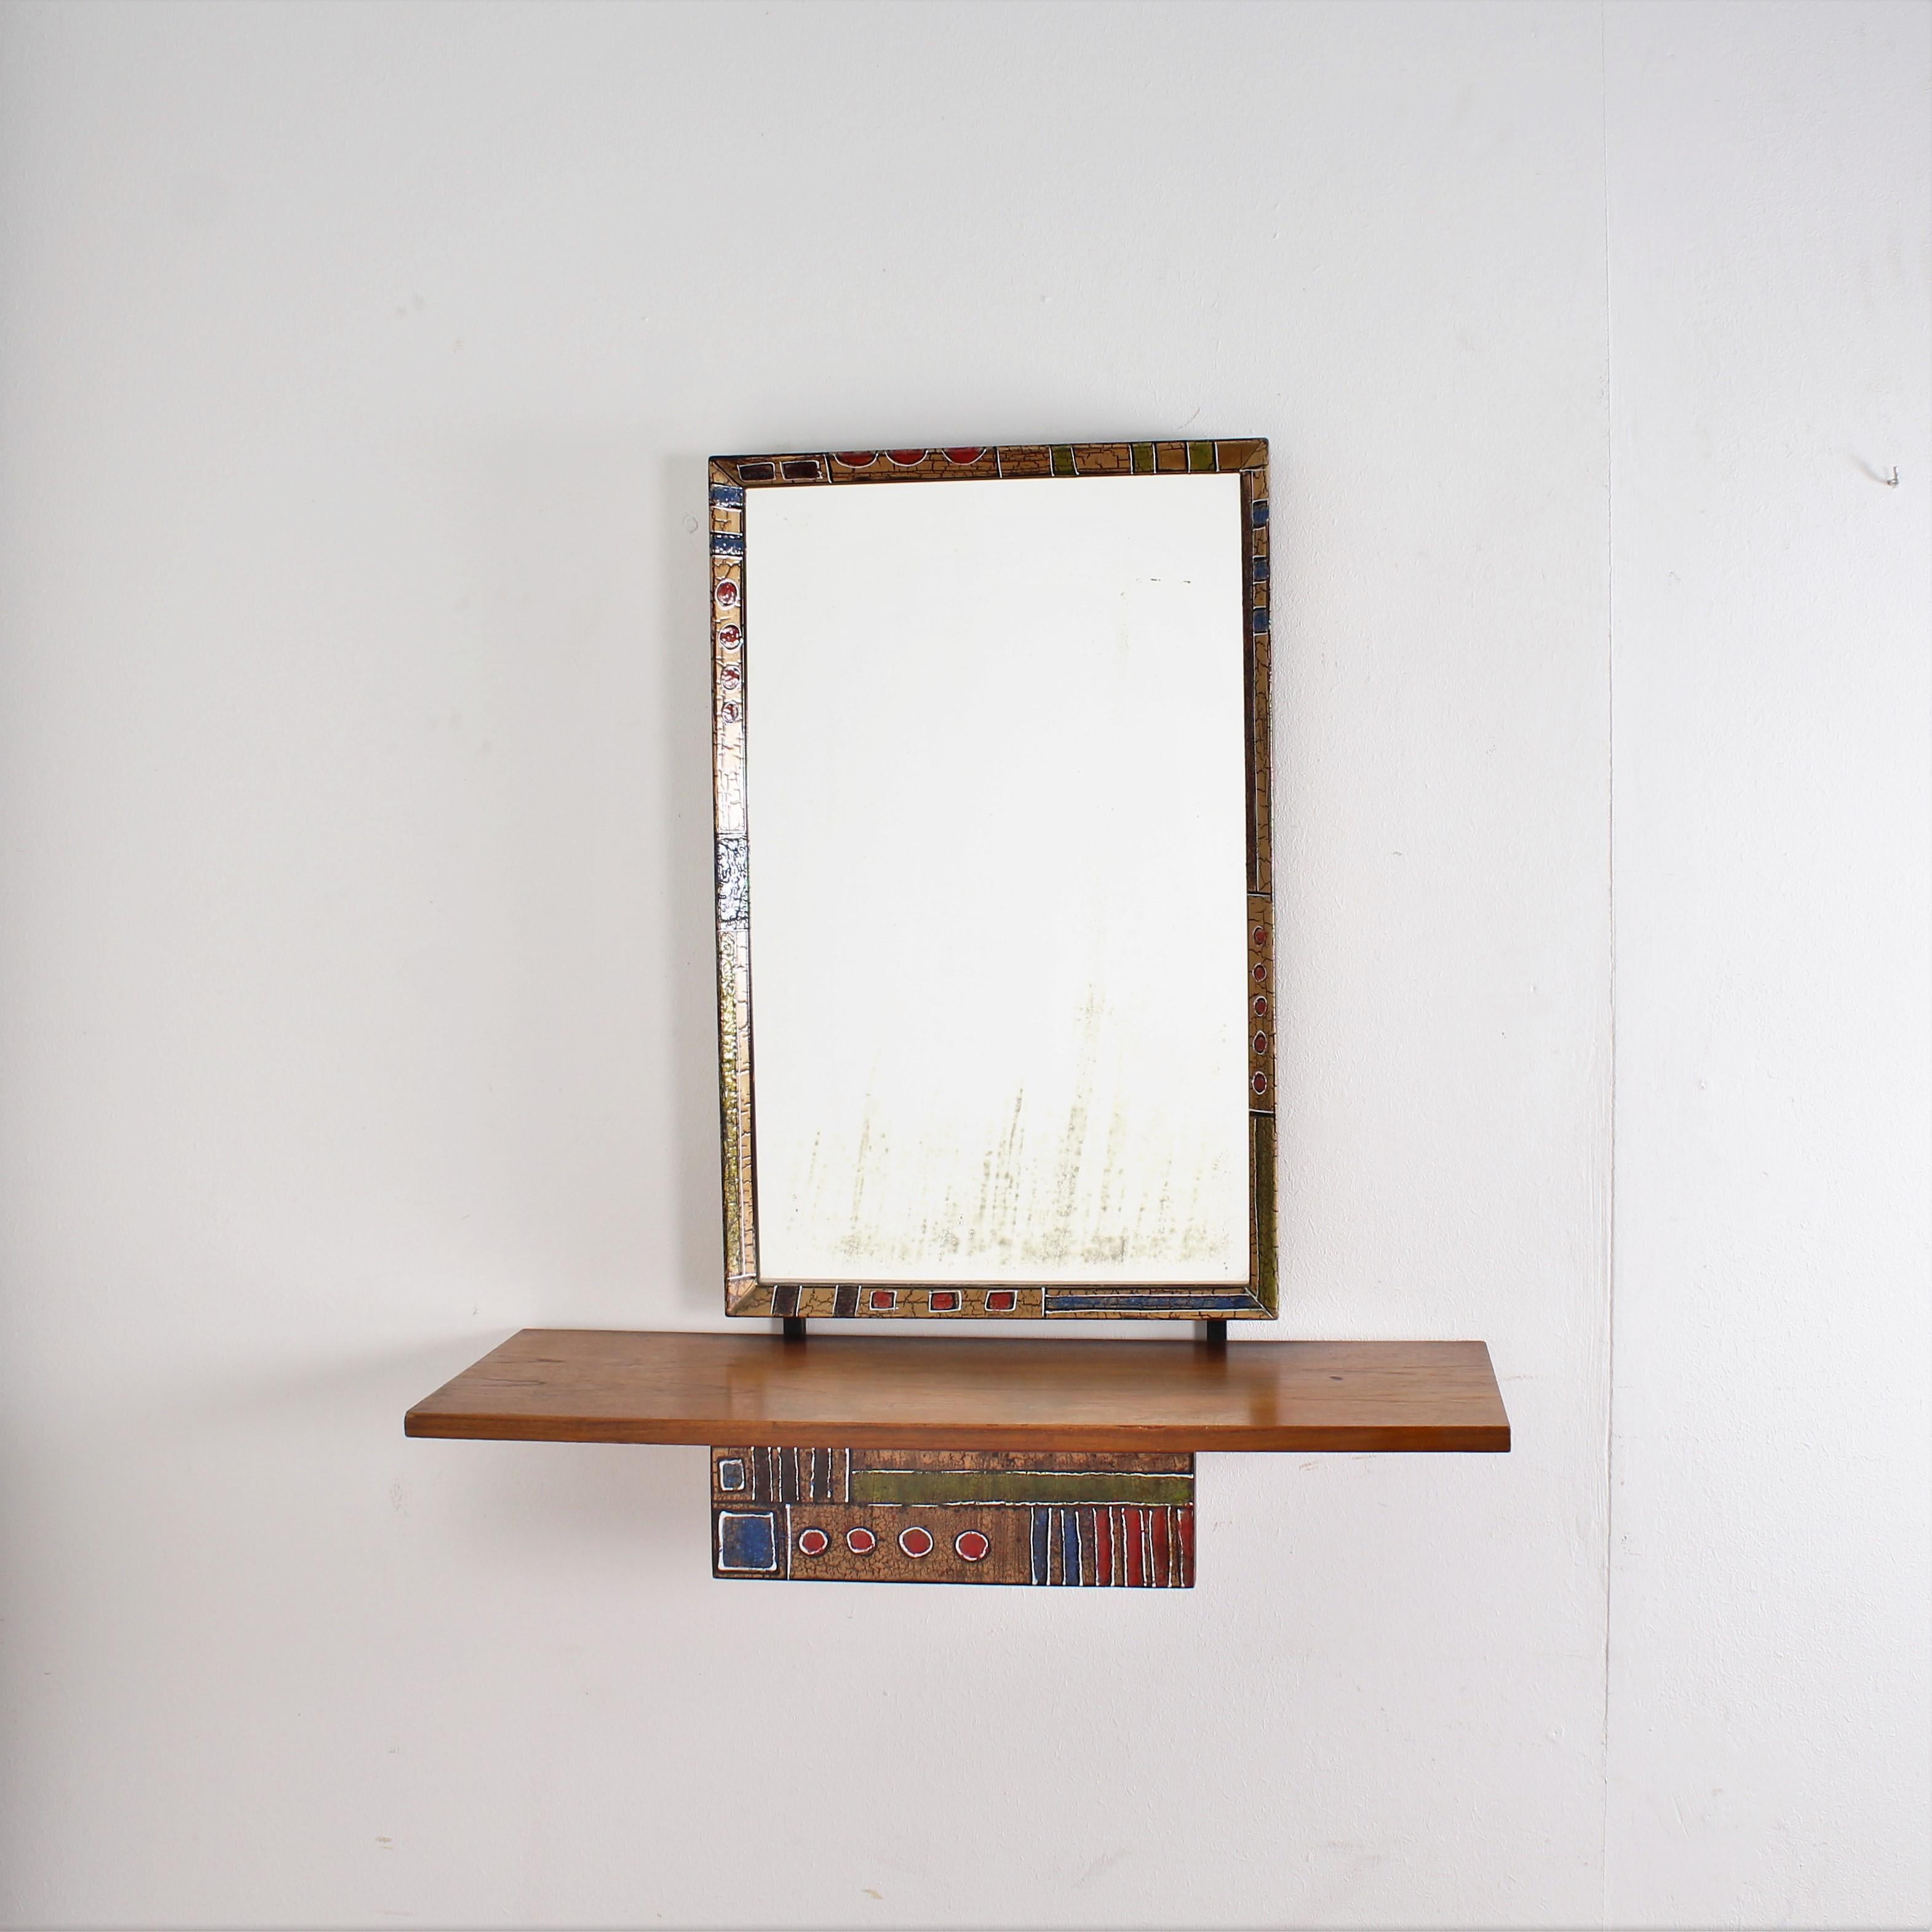 Original beautiful metal wooden console with rectangular wall mirror framed by an enameled metal profile by Esperia, Italy, 1960s.
The design of the structure is enlivened by a small drawer with decorations with polychrome enamels on the front